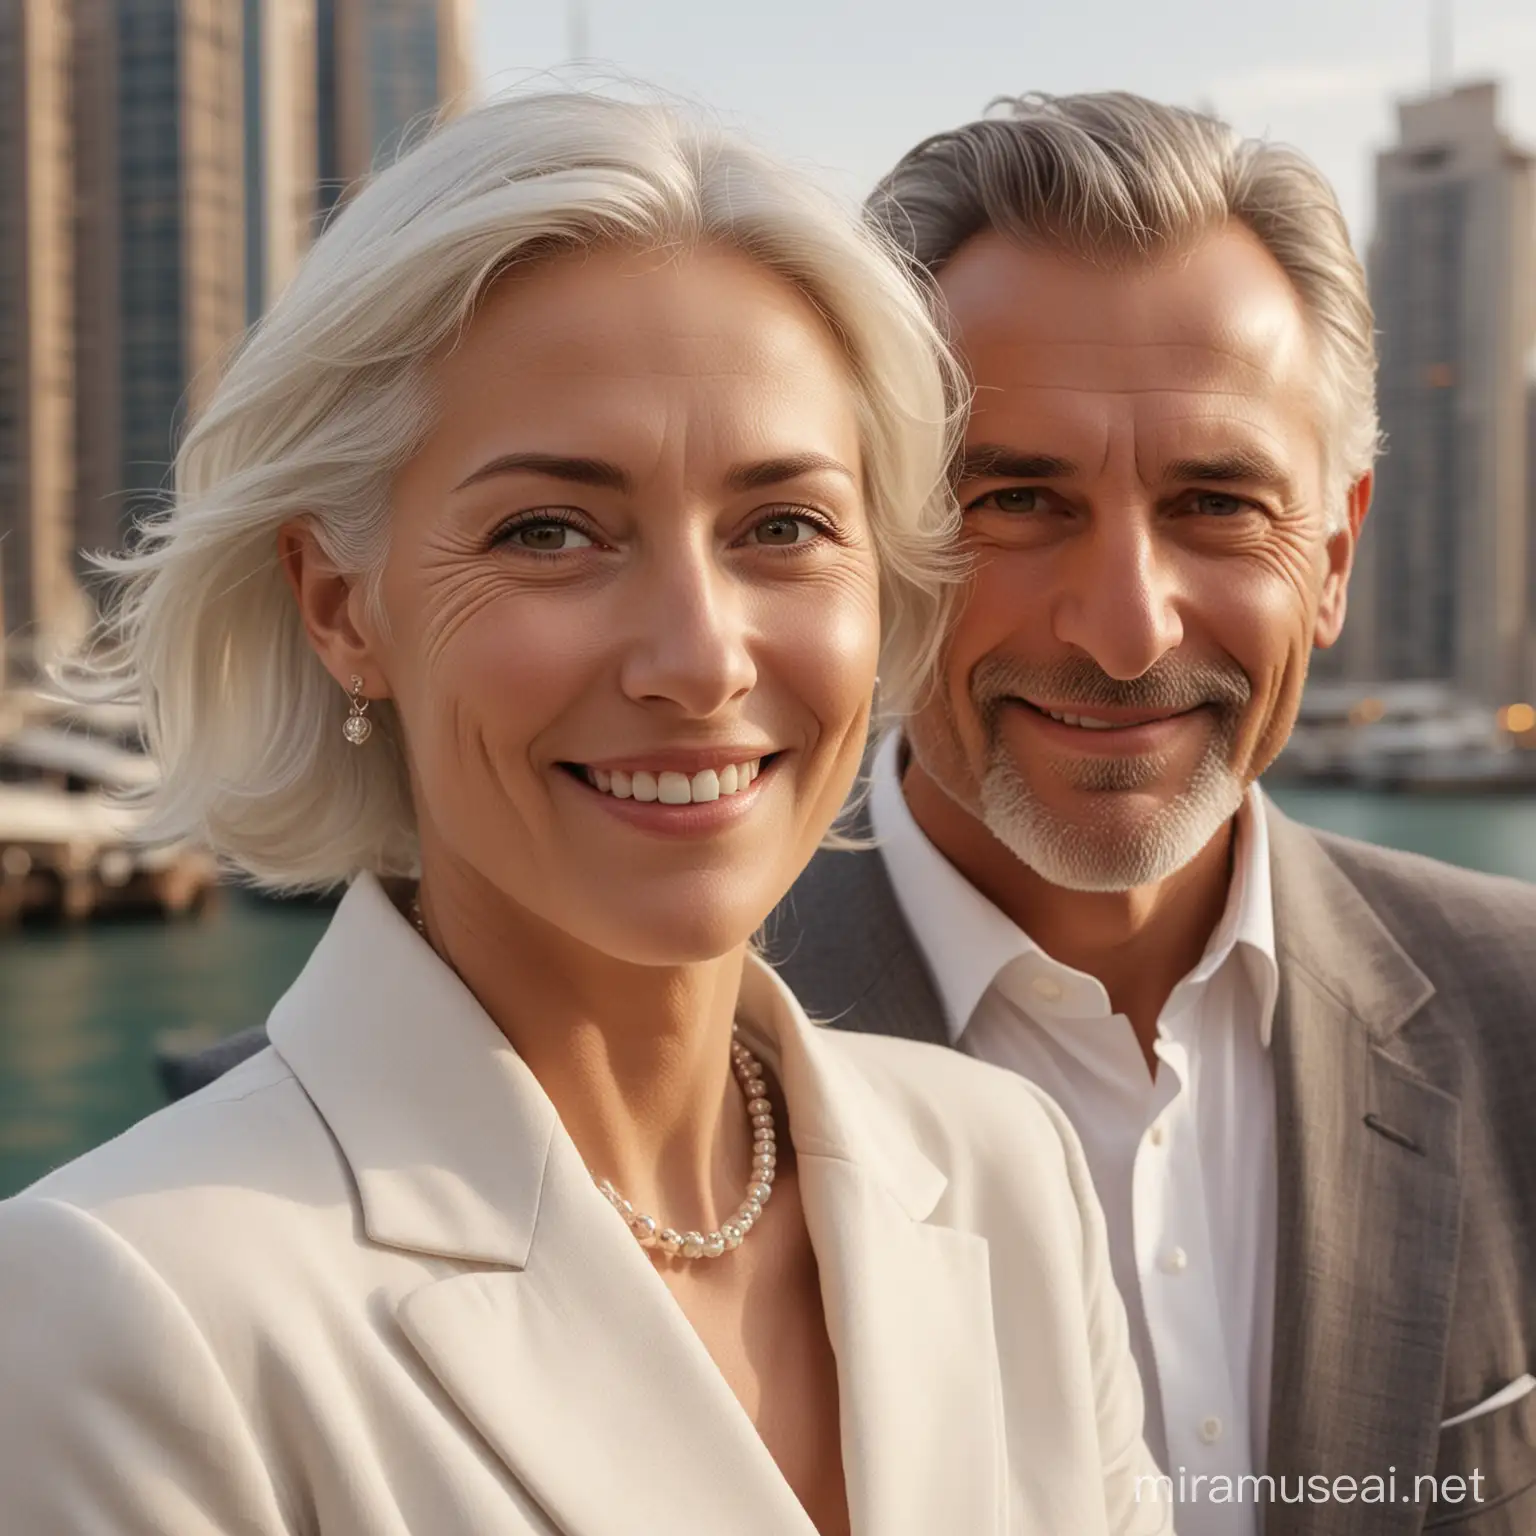 8K photorealistic Image of a couple of European retirees, a man and a woman, with white faces, wearing light clothes. They have a slender faces with high cheekbones. Their smiling eyes are large and expressive, with dark irises, framed by neatly shaped eyebrows. The woman and the man are wearing a light-colored, probably white, button-up shirt underneath a tailored gray blazer. The blazer is well-fitted, accentuating shoulders and waist. They wear minimal jewelry. The lighting in the image is soft and diffused, creating a gentle glow on their faces and a subtle interplay of light and shadow that gives their skin a luminous quality. Background is Dubai Marina, providing a contrast that highlights silhouette. Their pose is relaxed yet confident, and their torso turned towards the camera. Their expression is serene and approachable, with a hint of a smile on  lips.